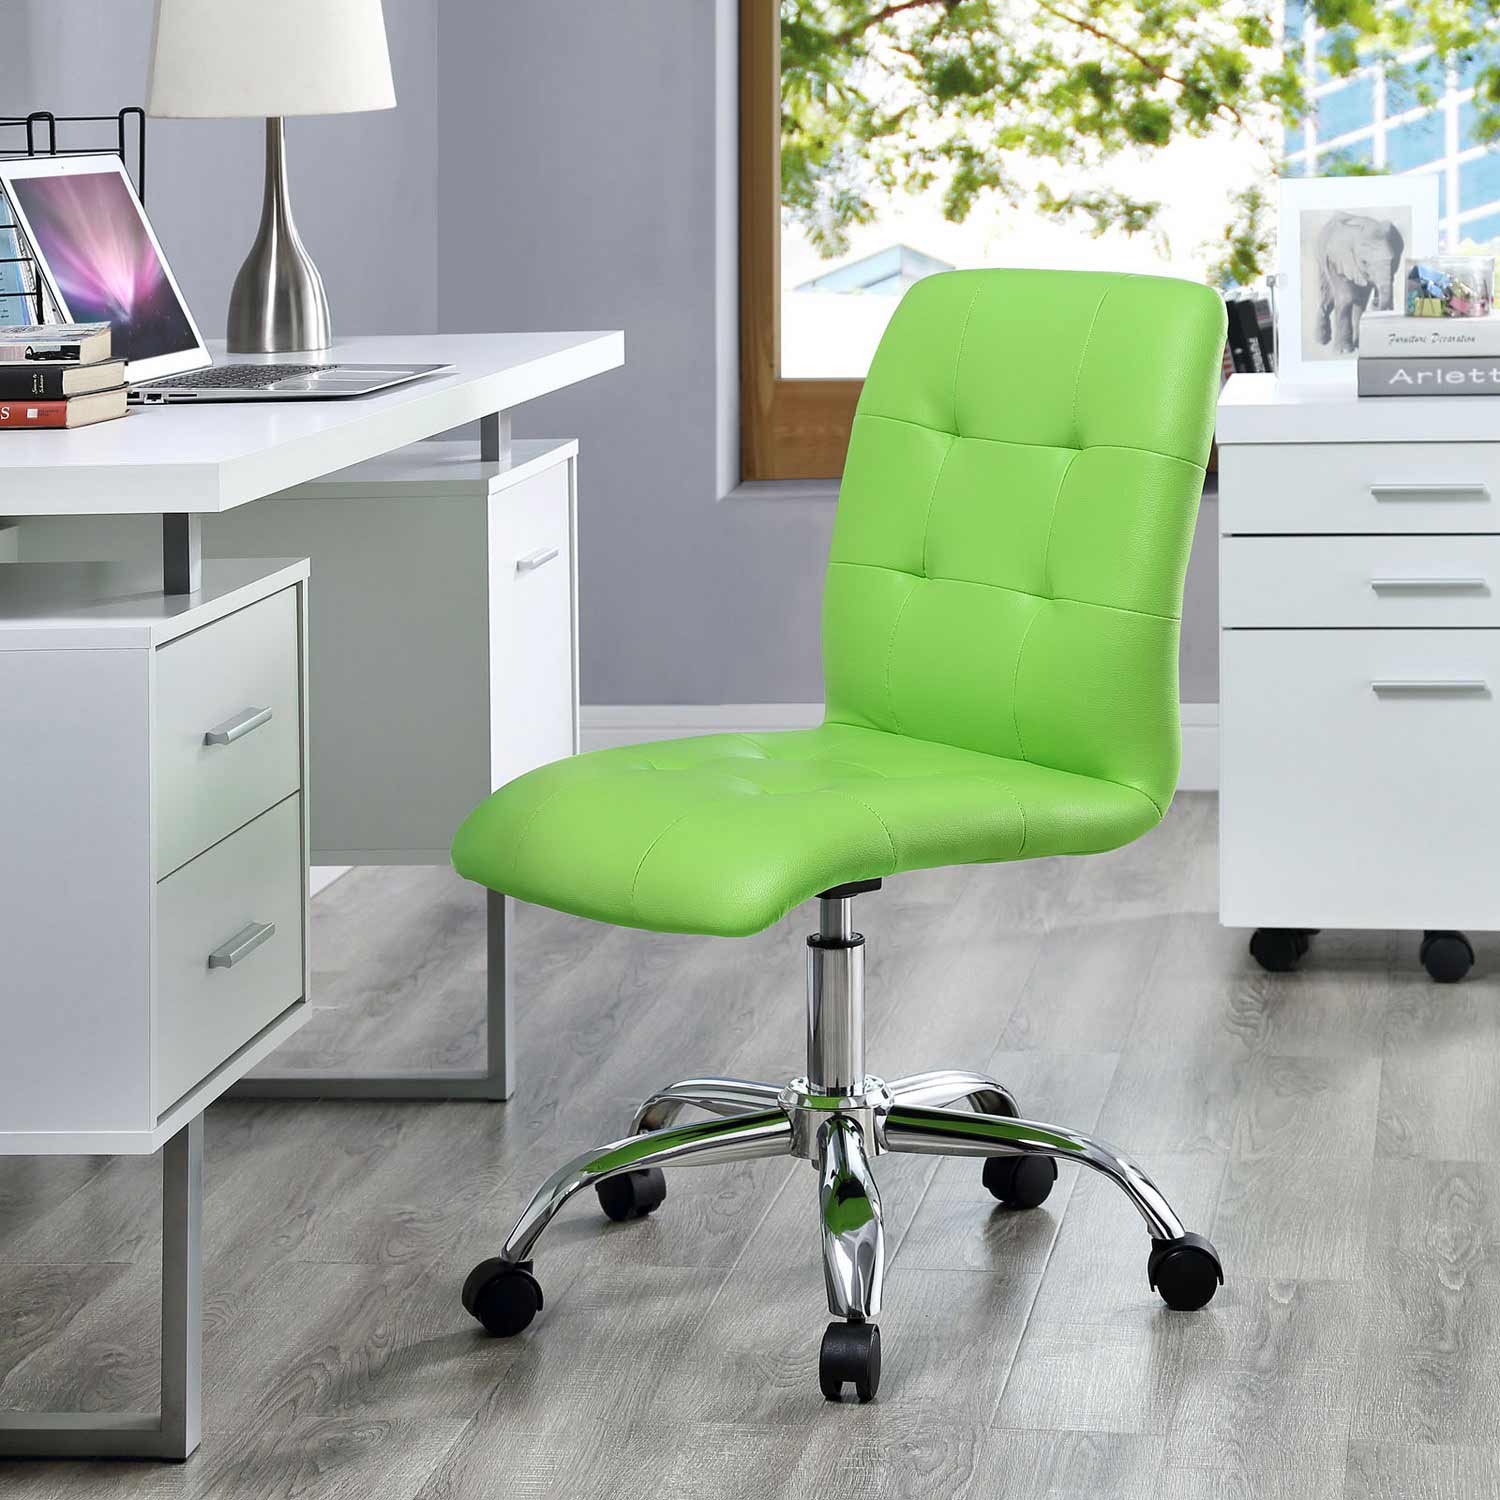 Modway Prim Armless Mid Back Office Chair - Bright Green